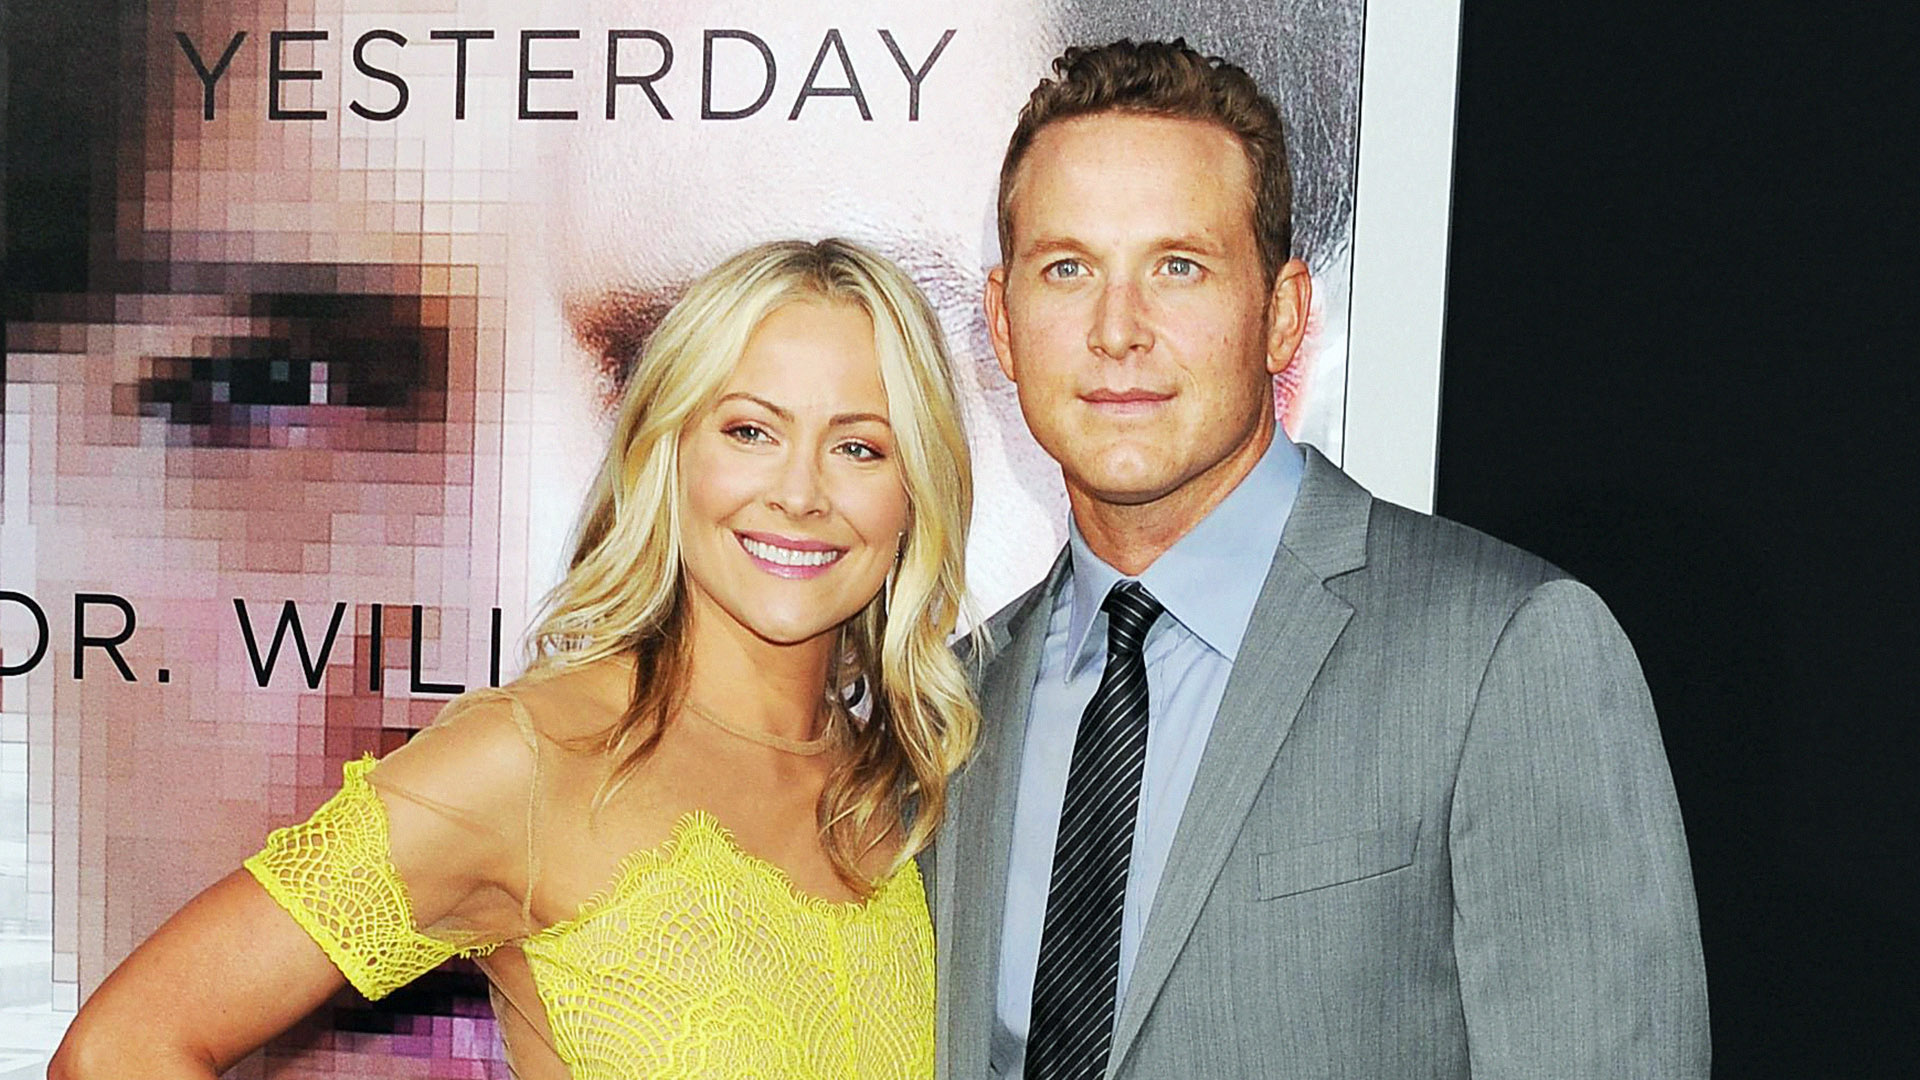 Yellowstone: Cole Hauser's Wife is The 90s TV Star You Totally Forgot About